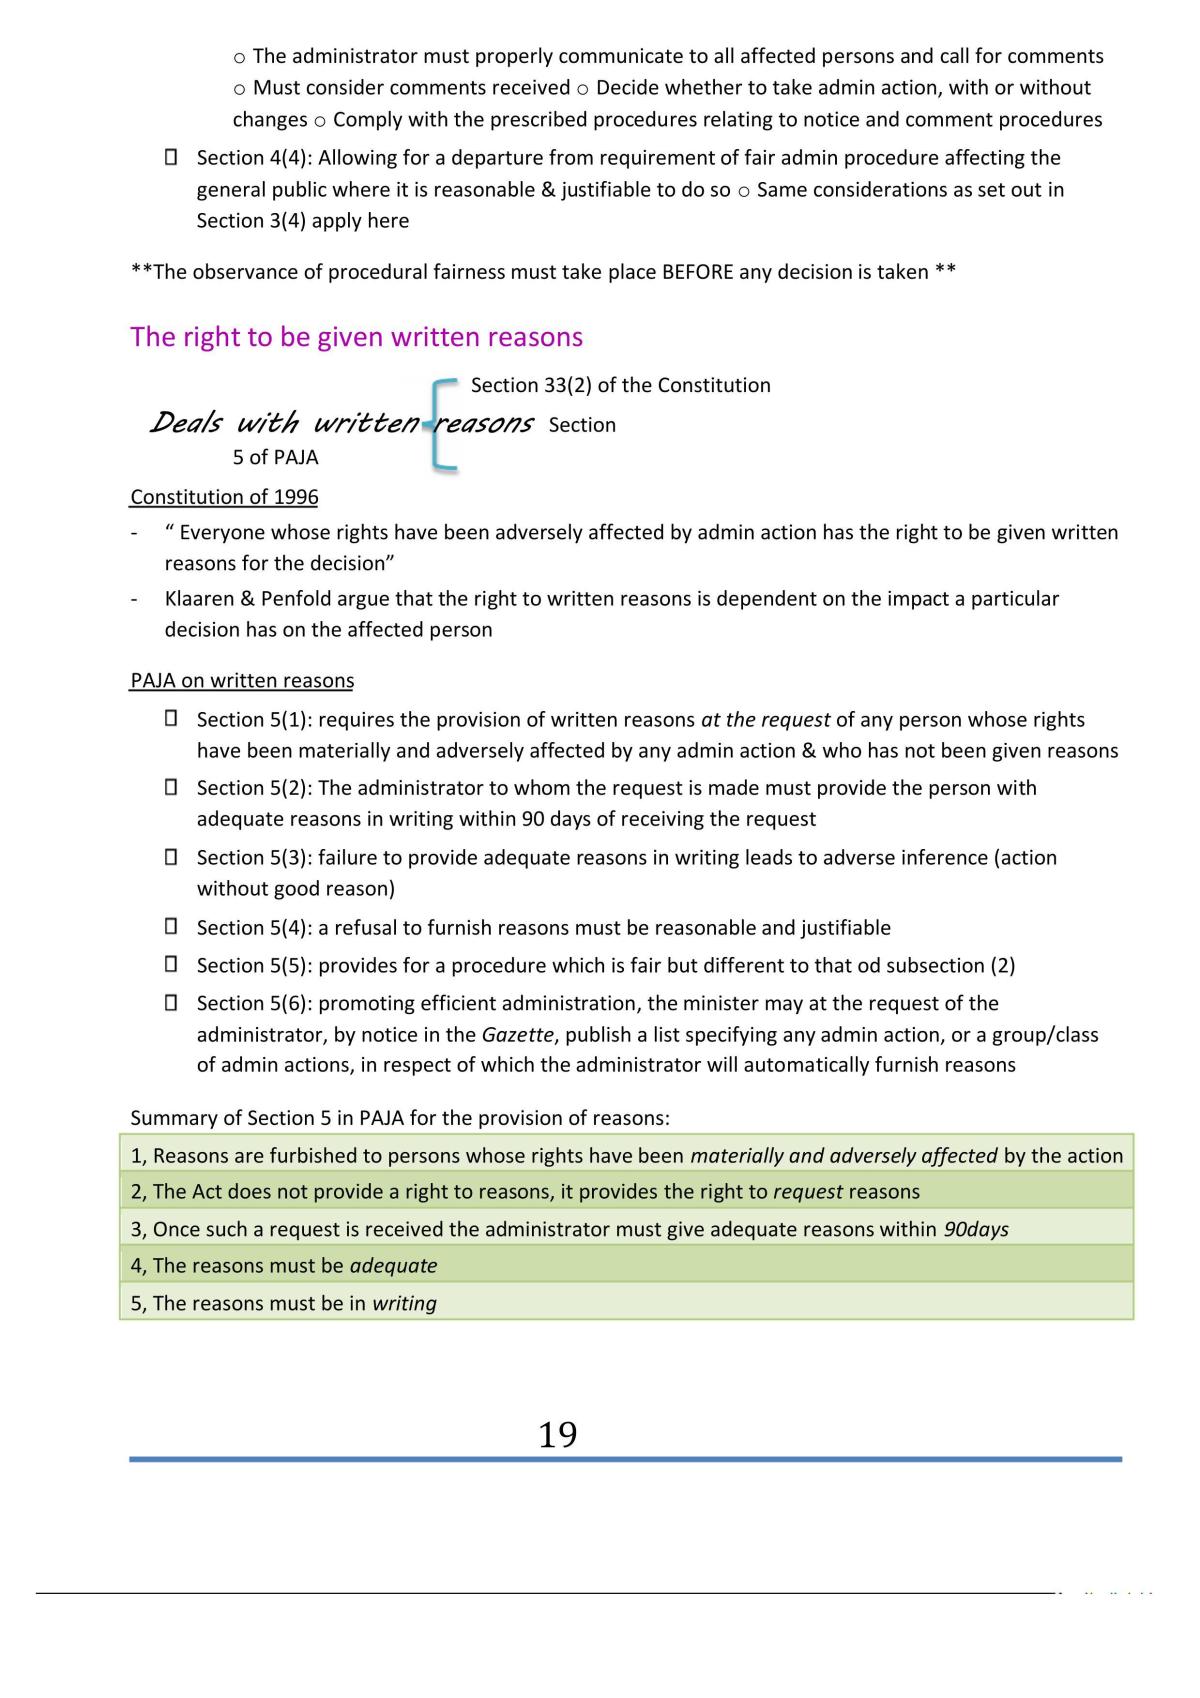 Administrative Law Study Notes - Page 19